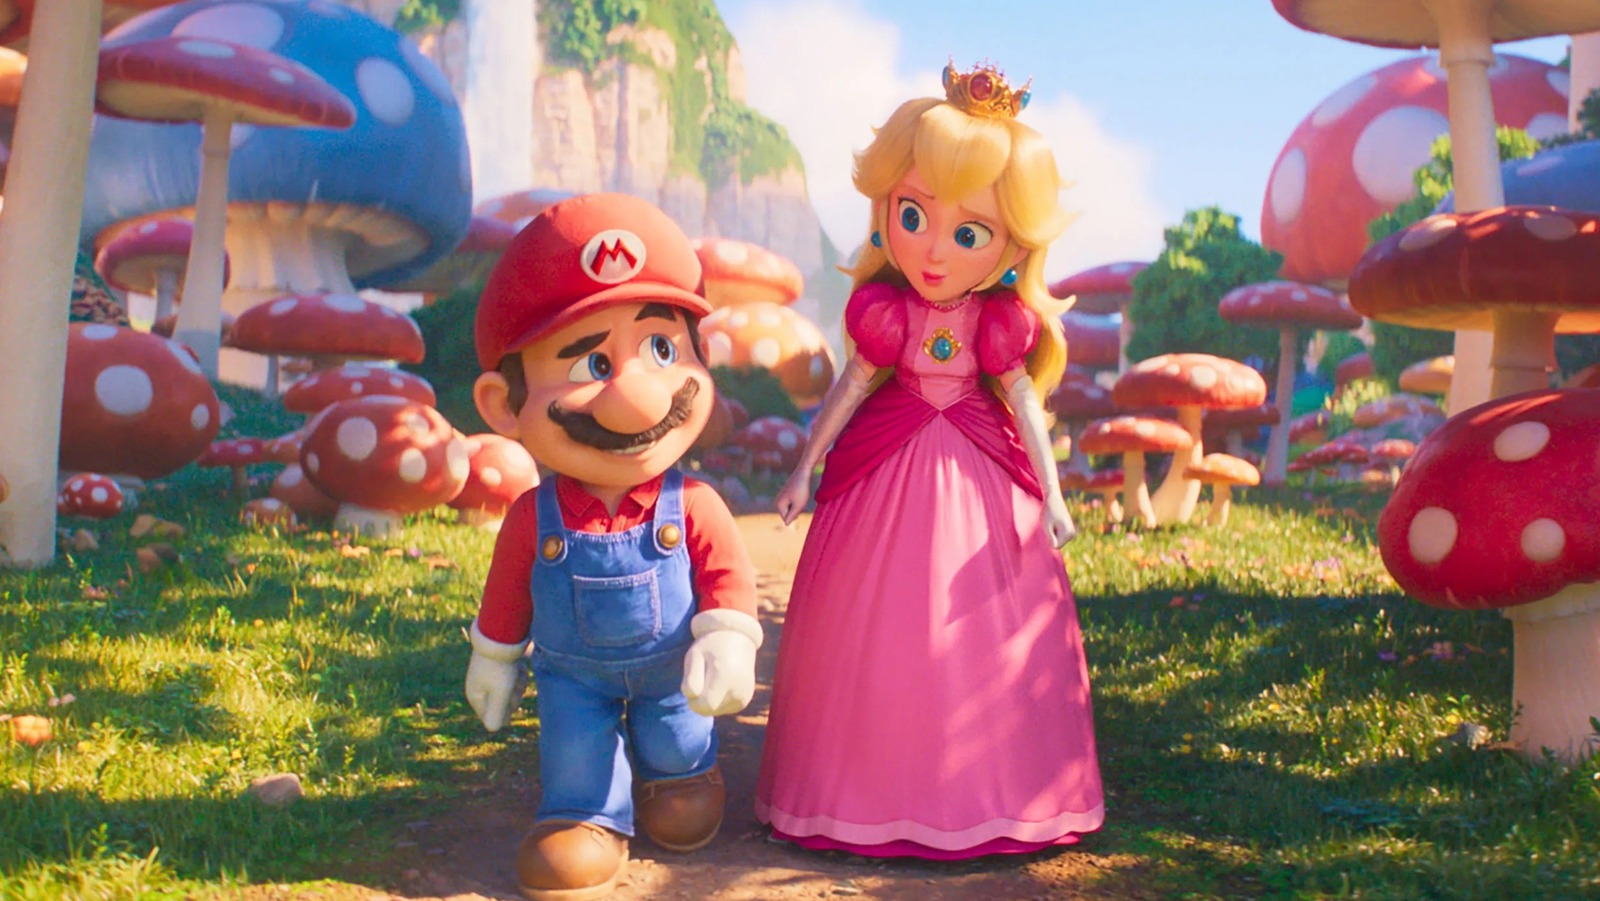 Where Are The Female Characters in the Mario Movie? - KeenGamer